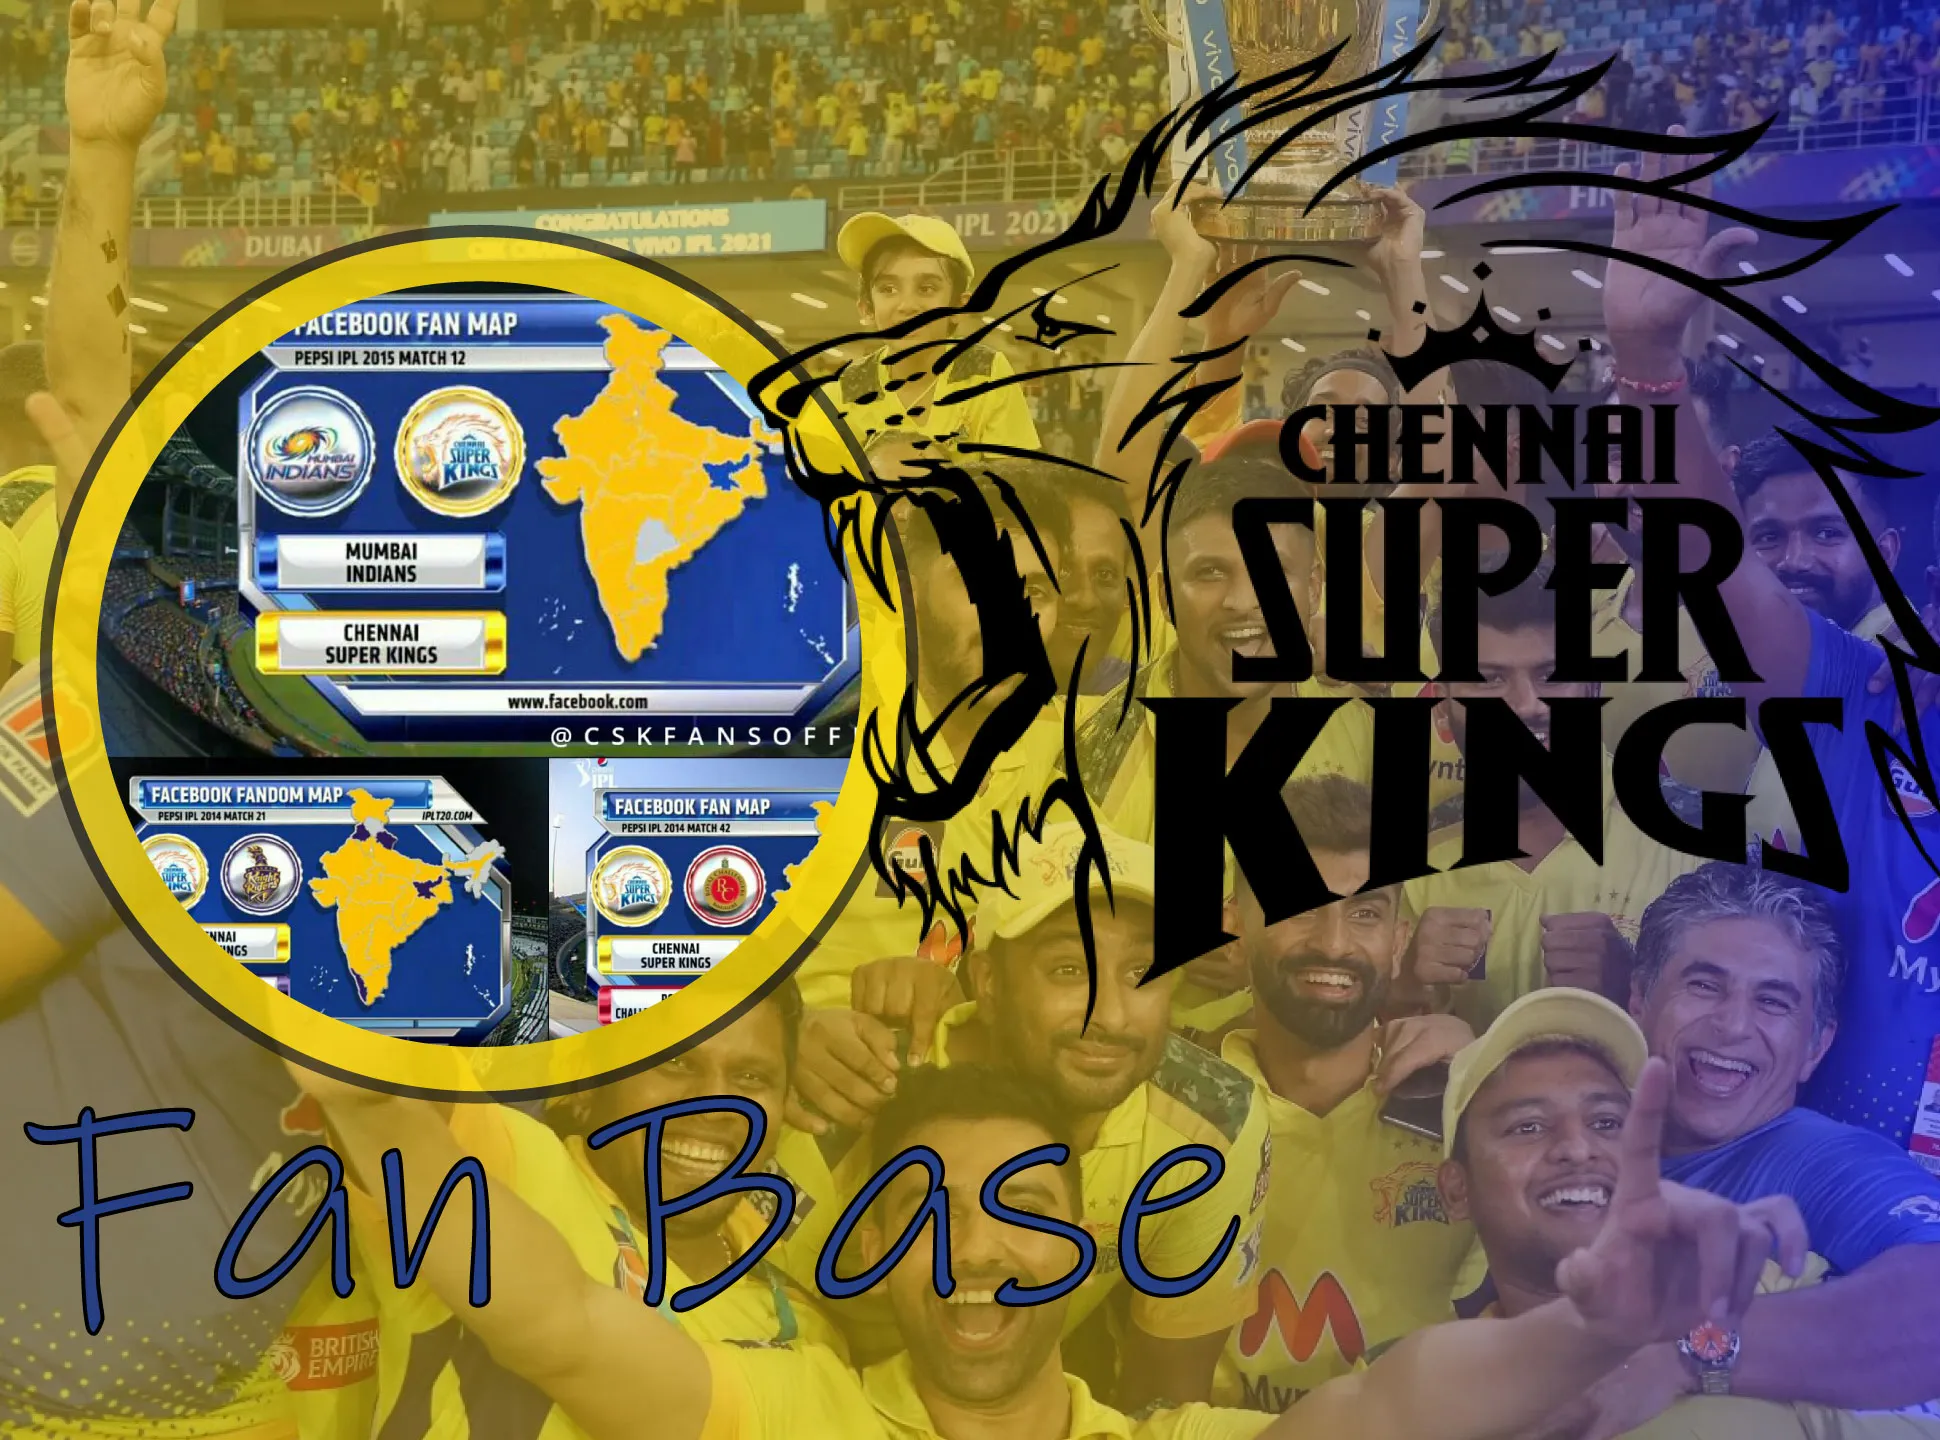 Chennai Super Kings has a huge fan support.